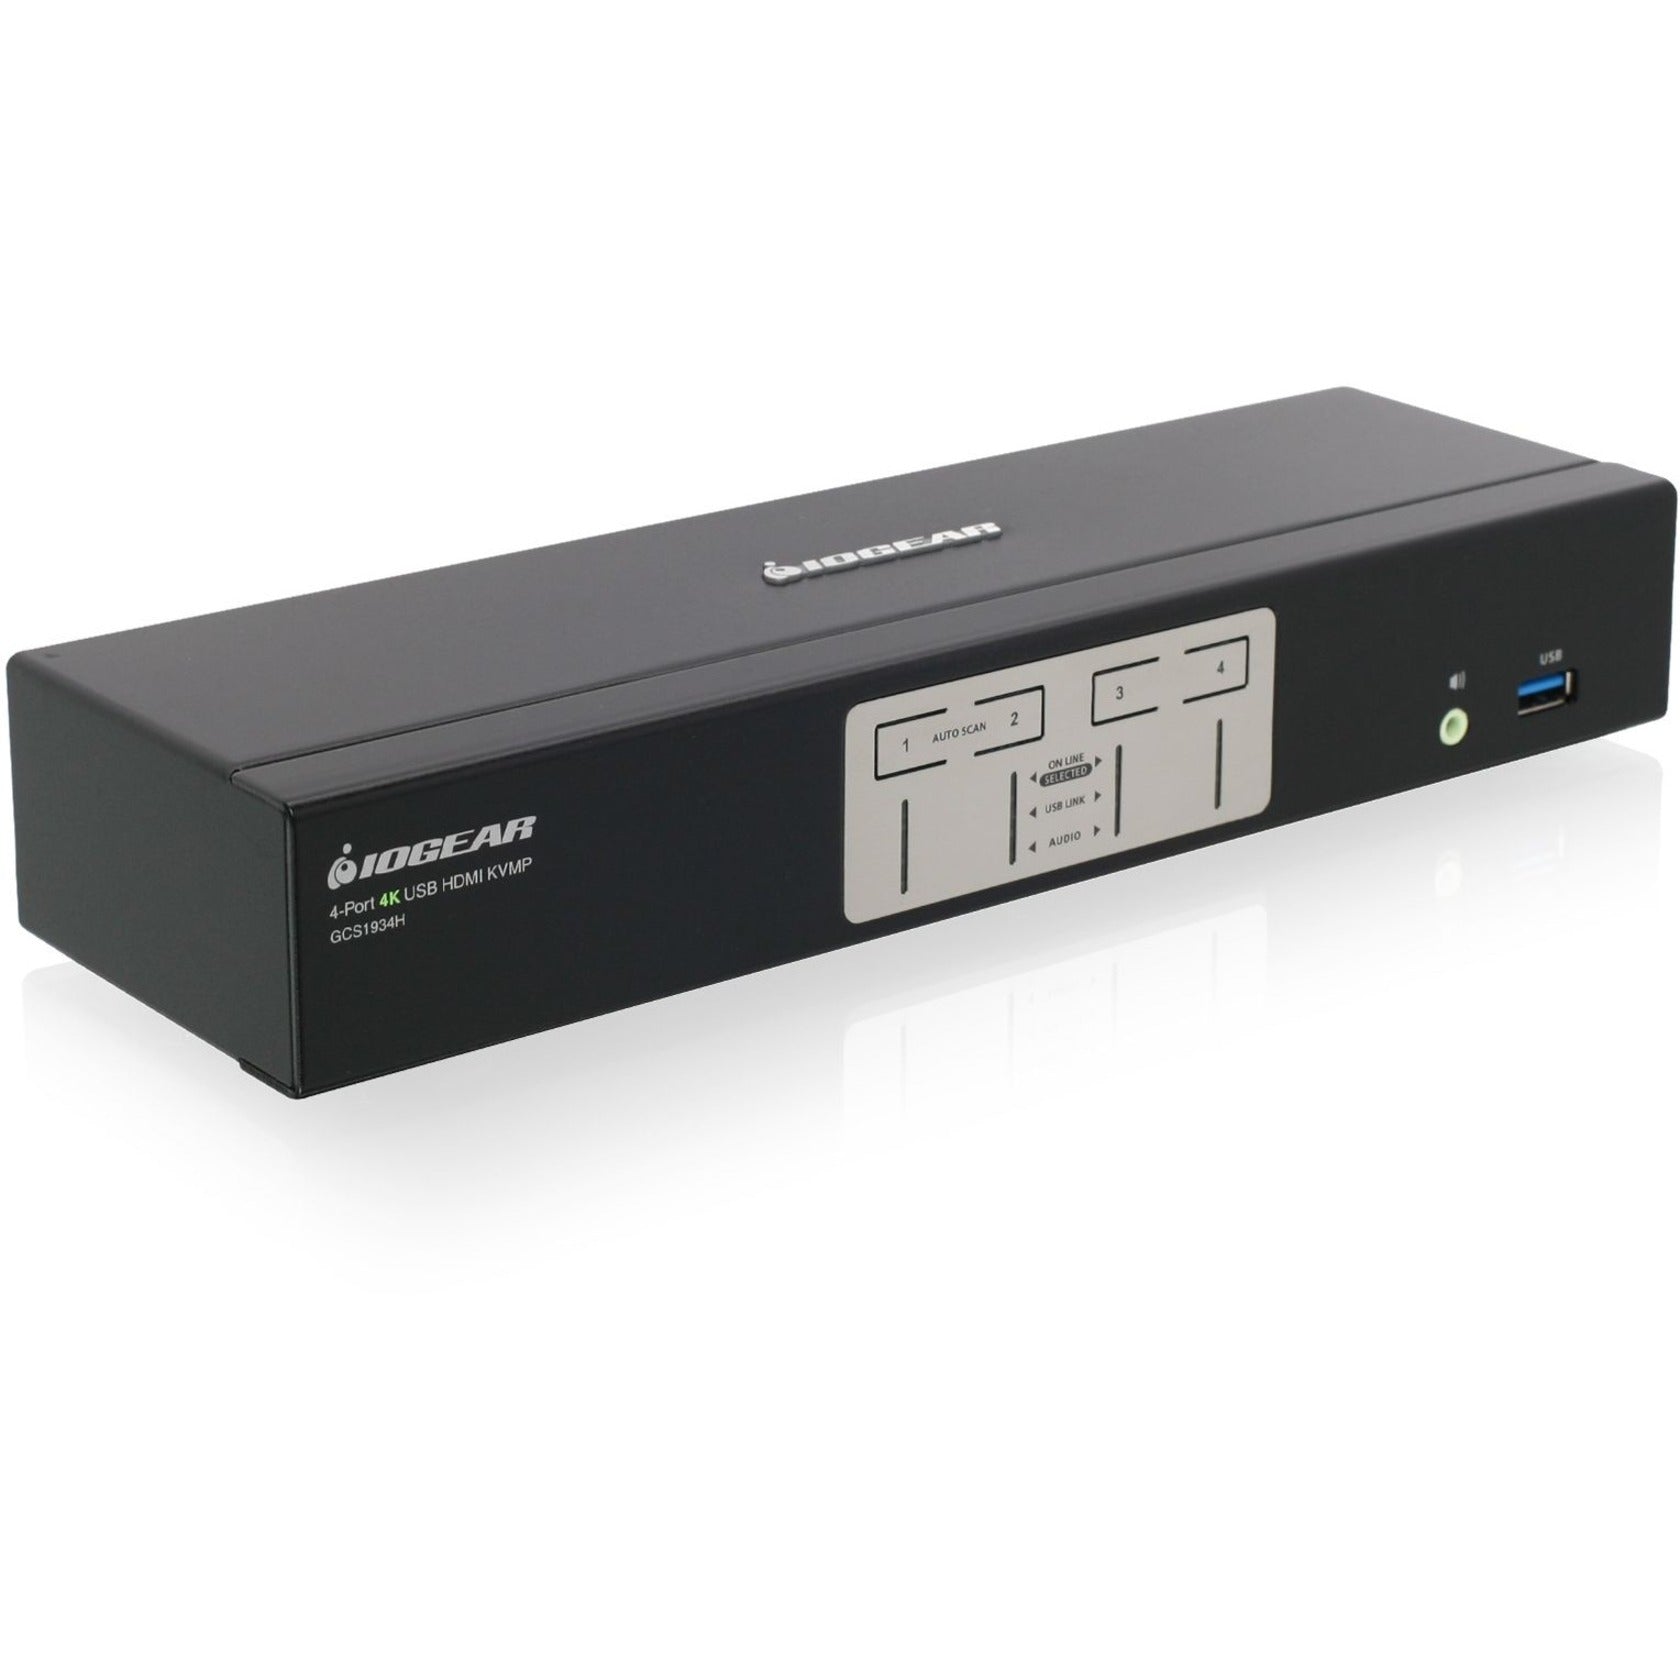 IOGEAR GCS1934H 4-Port 4K KVMP Switch with HDMI Connection, USB 3.0 Hub, and Audio (TAA), Maximum Video Resolution 4096 x 2160, 3 Year Limited Warranty